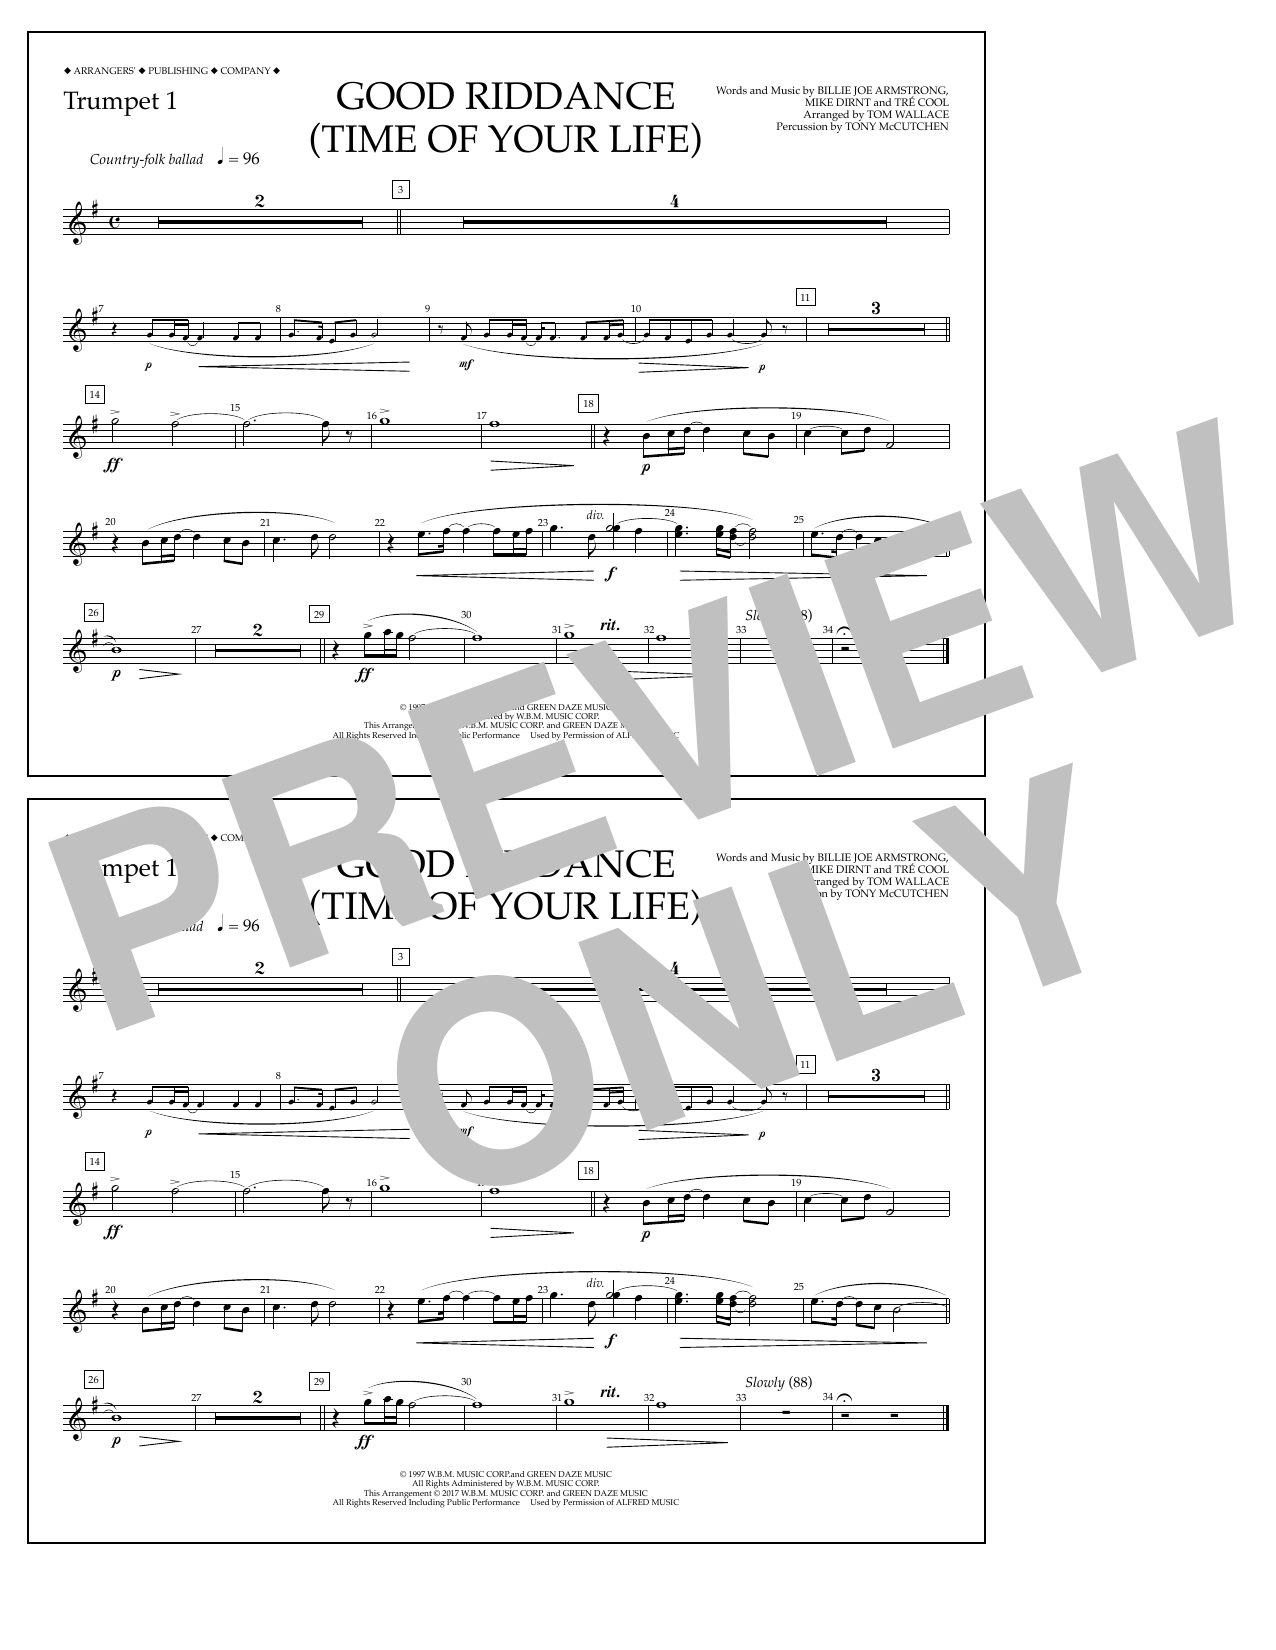 Download Tom Wallace Good Riddance (Time of Your Life) - Tru Sheet Music